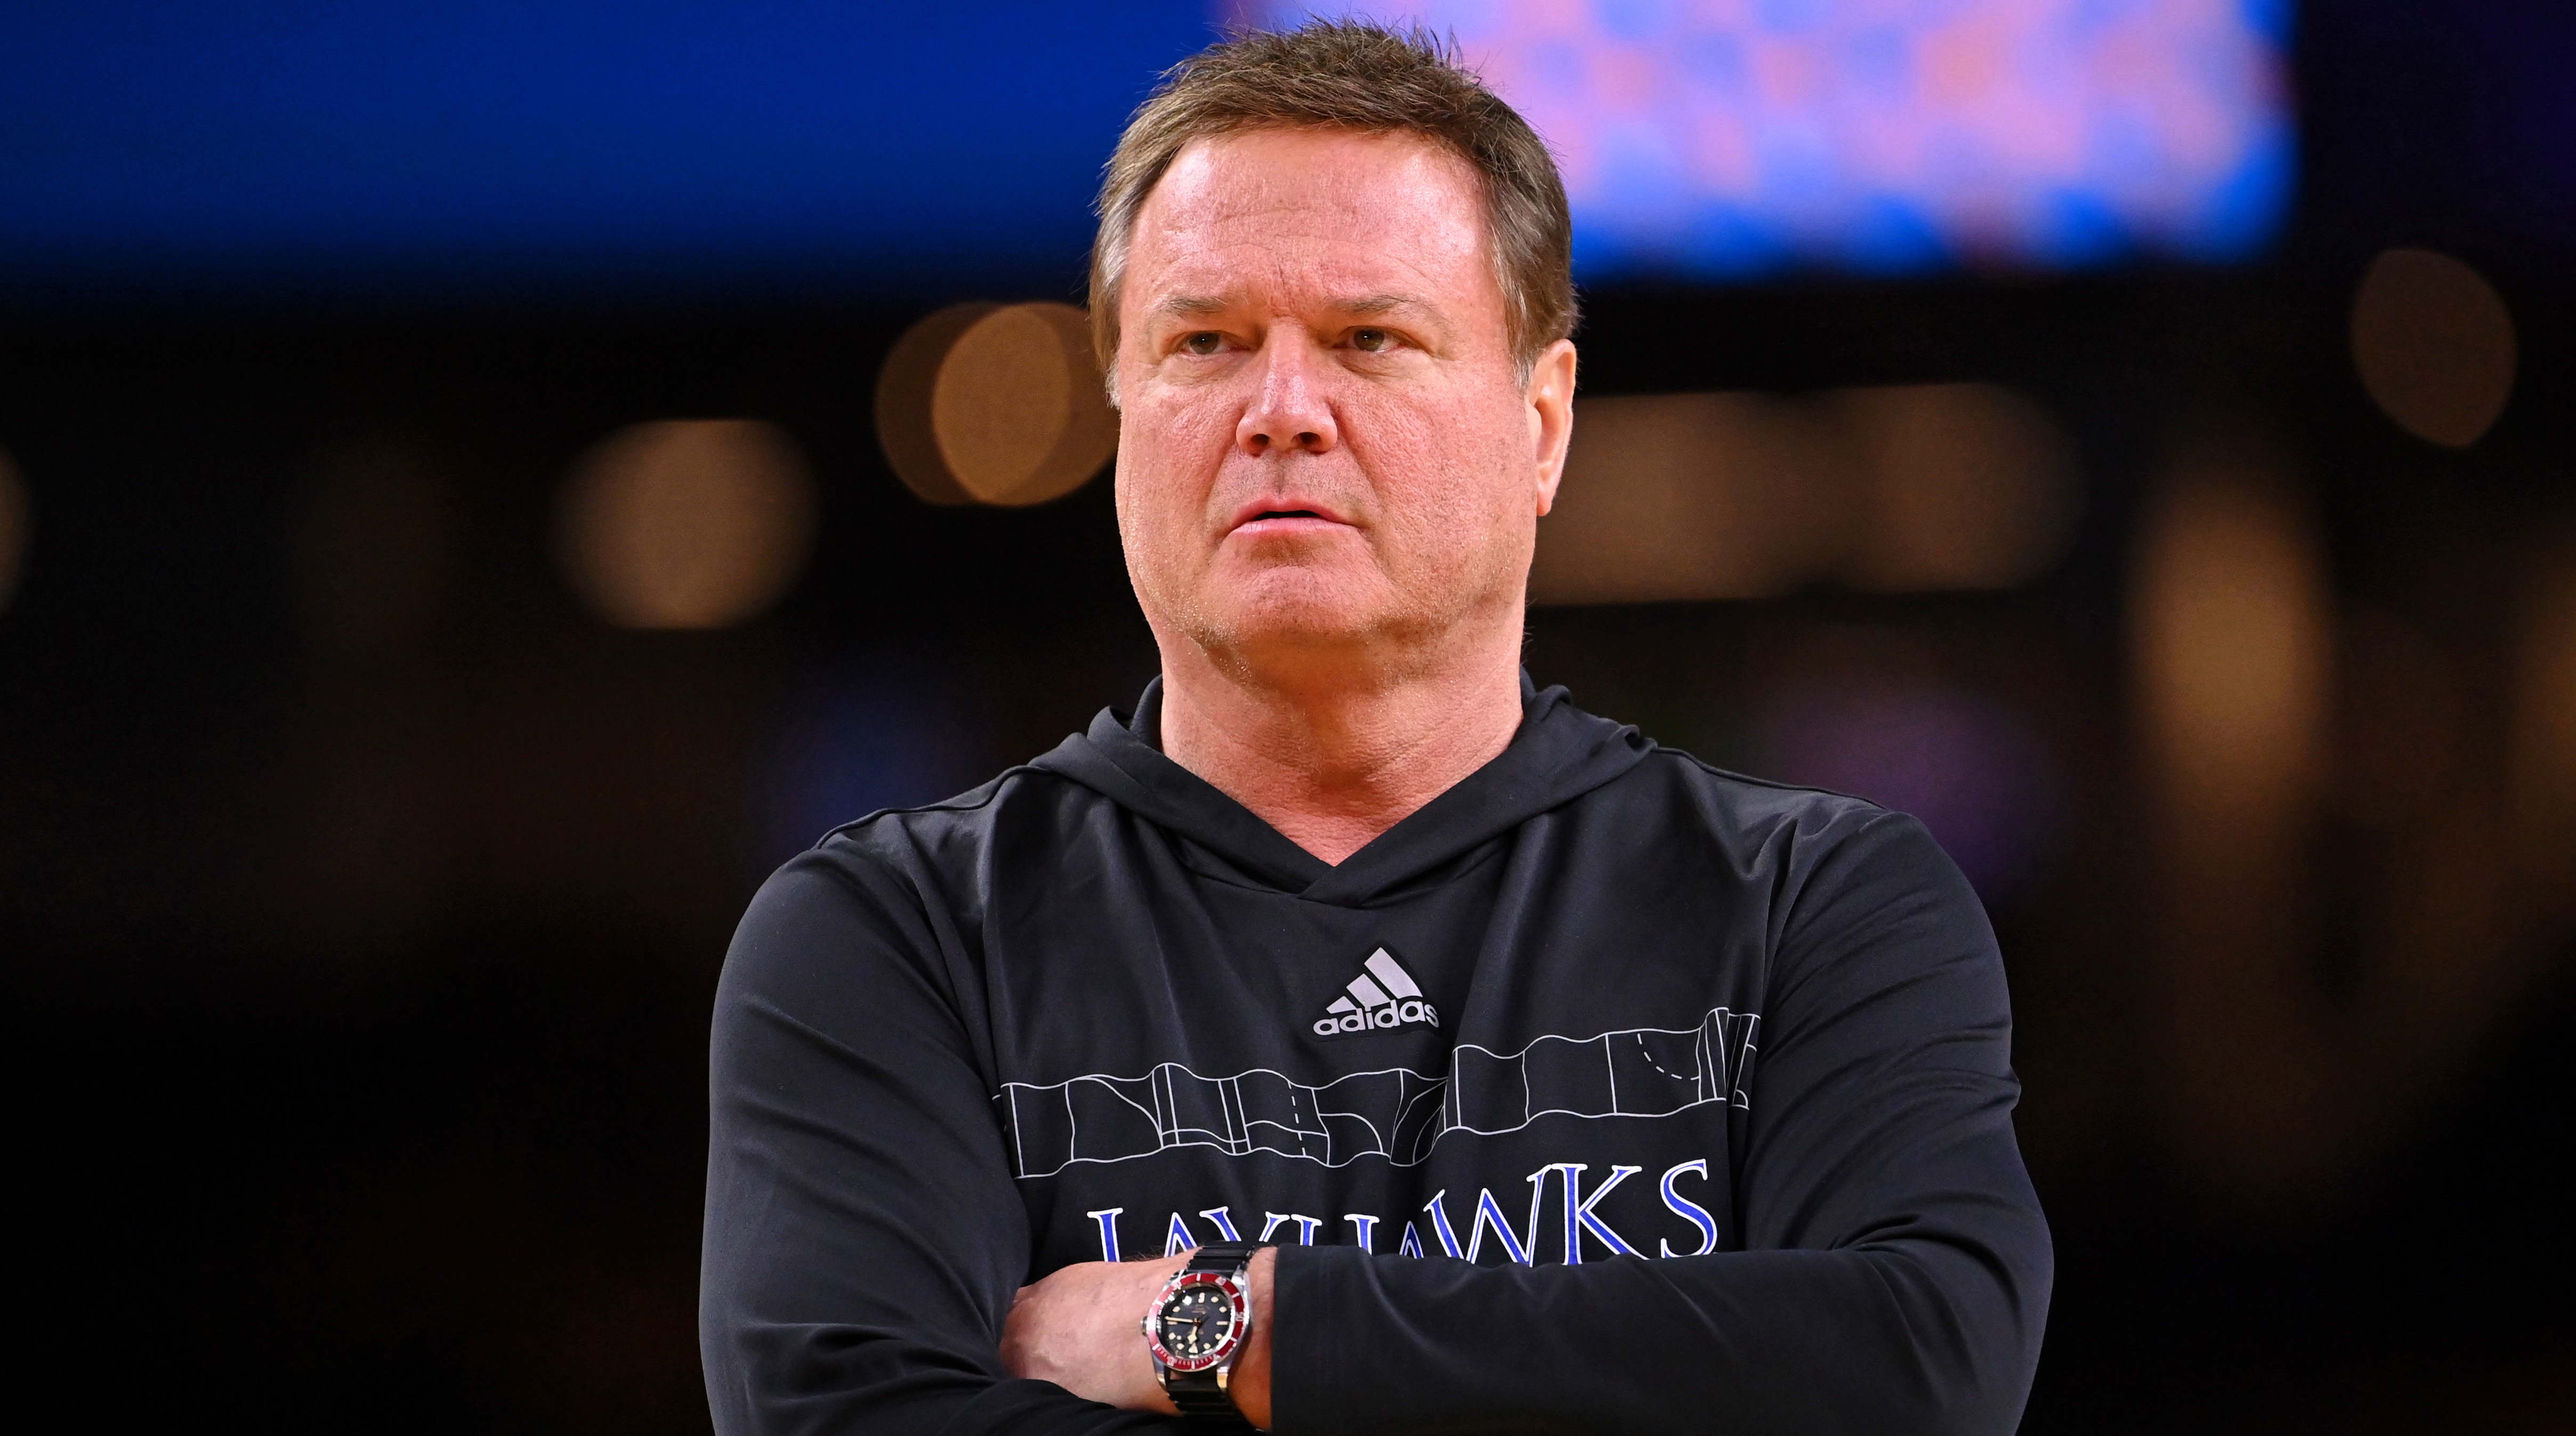 Kansas Jayhawks head coach Bill Self watches his team during a practice session.